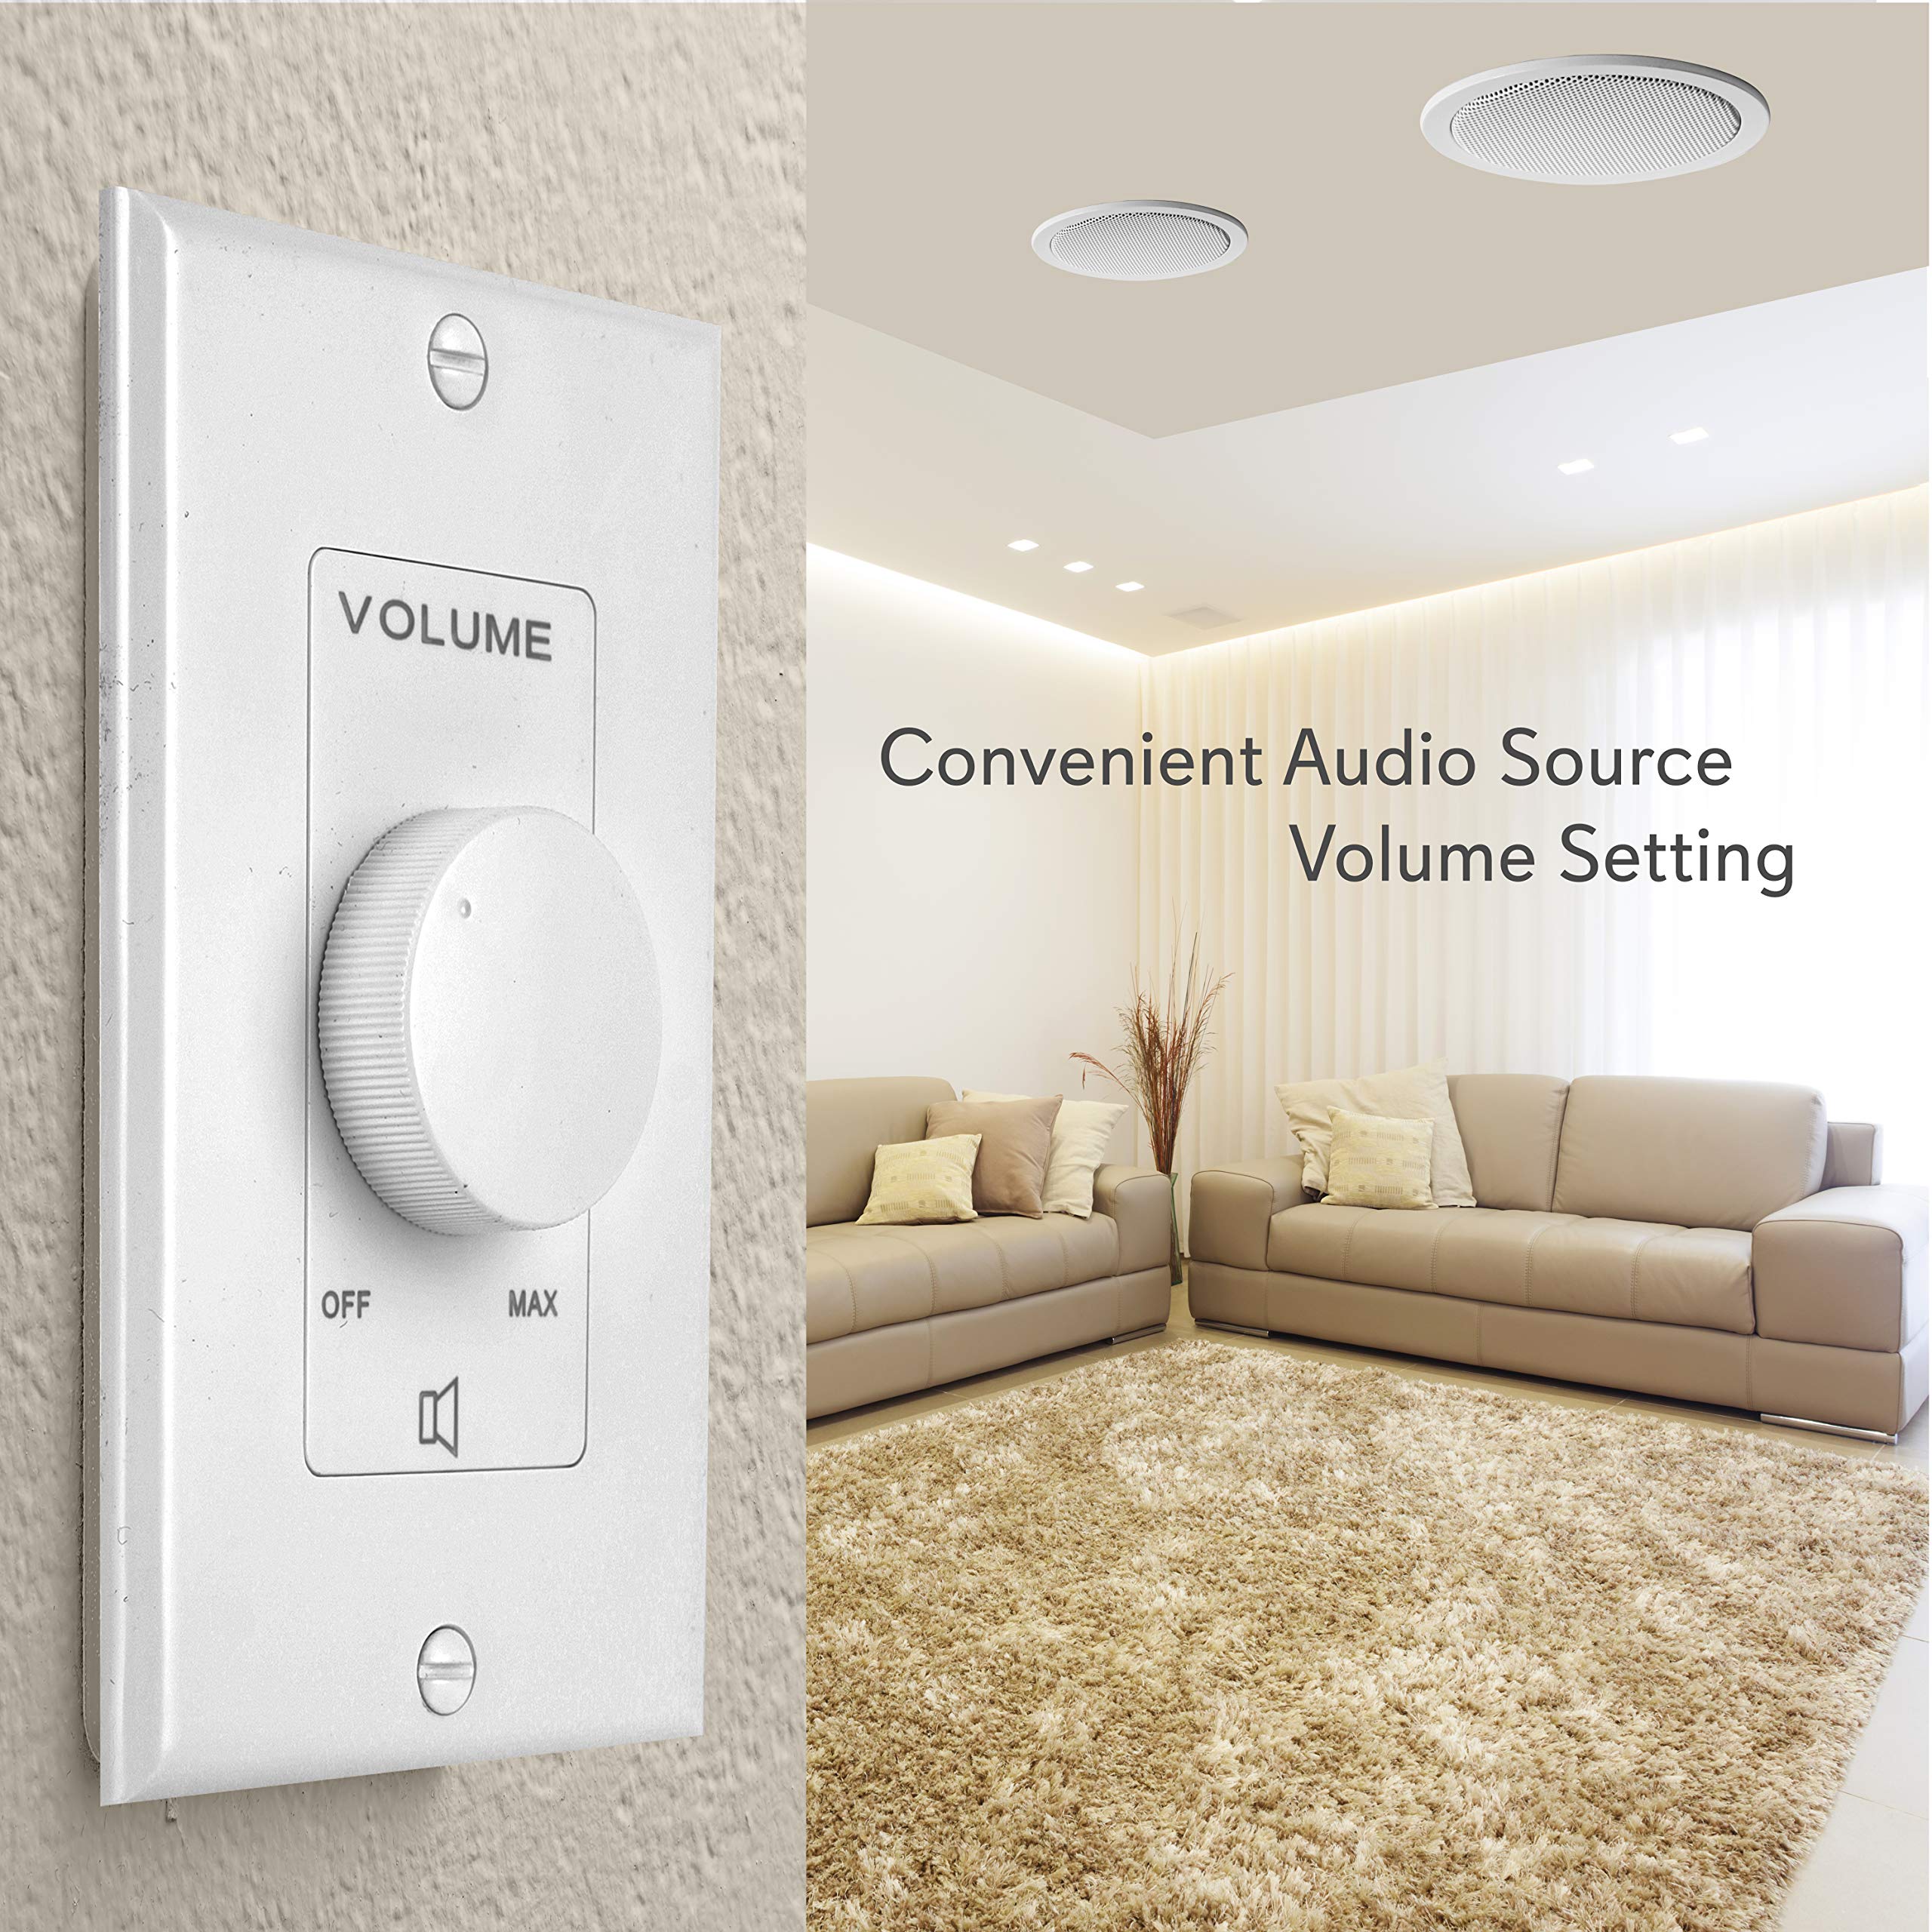 Pyle Home Wall Mount Volume Control Knob-Flush In-Wall Plate Rotary Style Adjustment,20-20kHz Freq. Response Companion for Hi-Fi Four-Pair Speaker Selector w/ Audio & Video Compatibility, White -PVC1